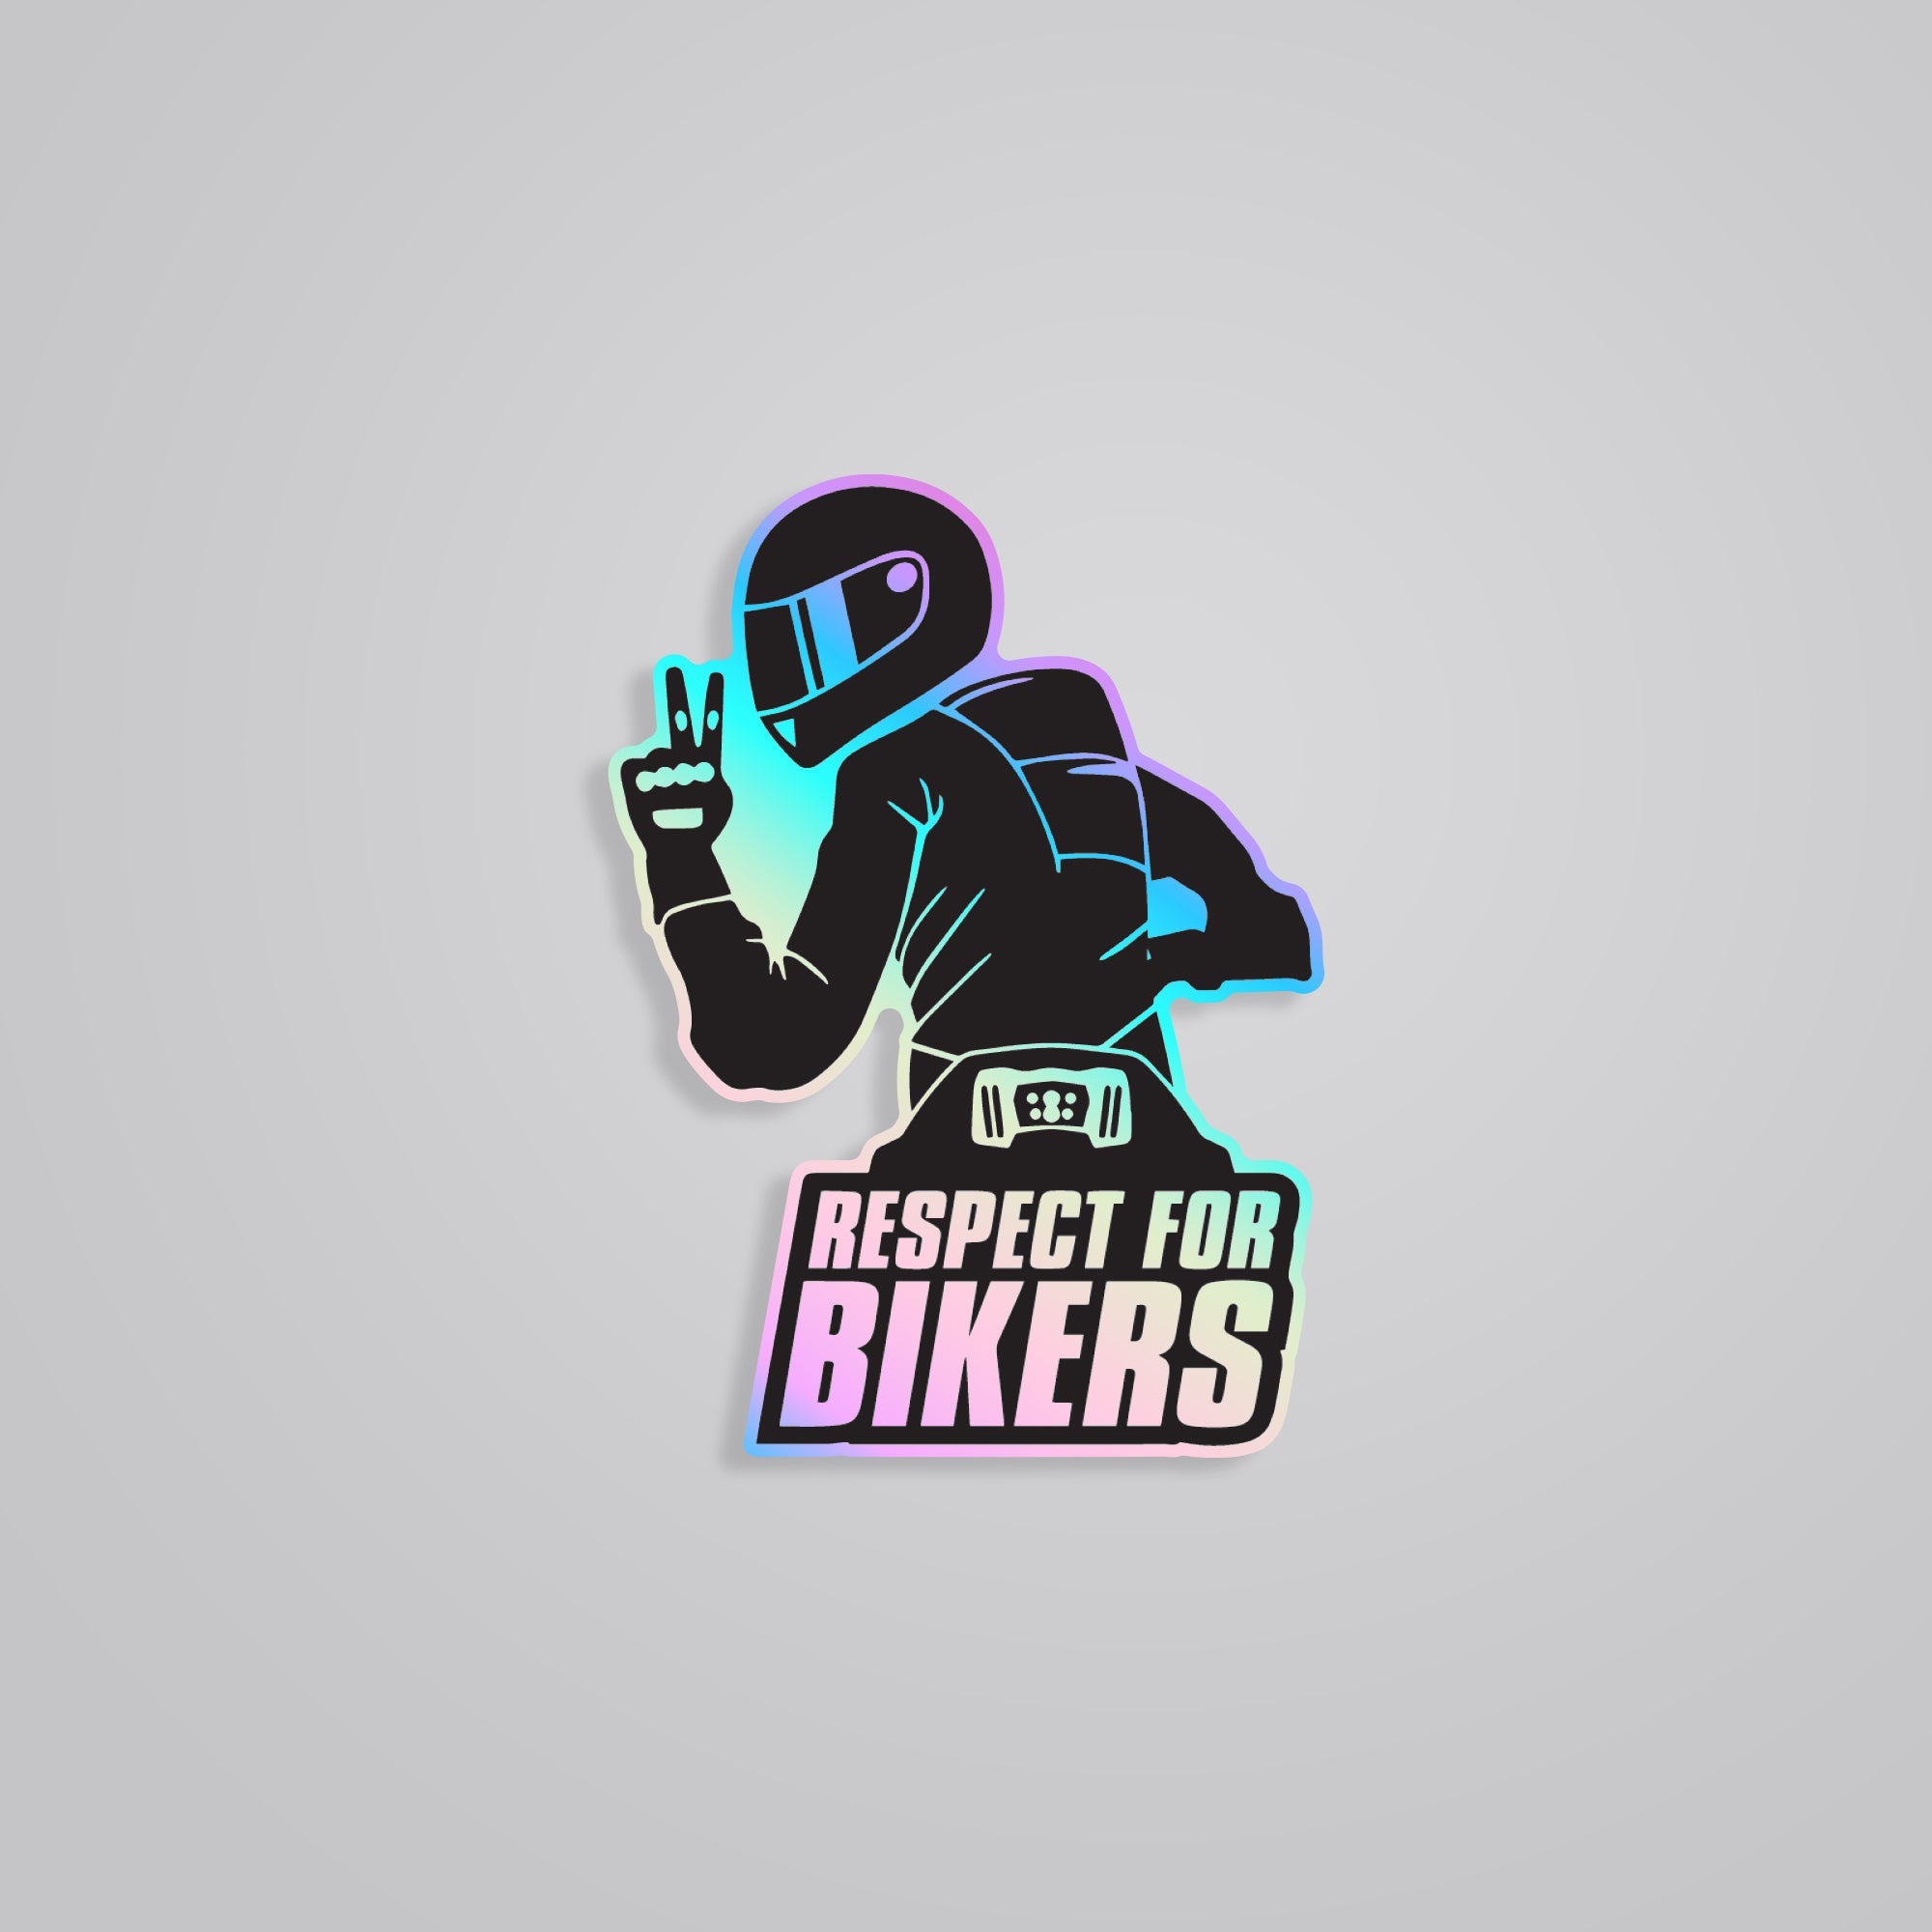 Fomo Store Holographic Stickers Cars & Bikes Respect for Bikers